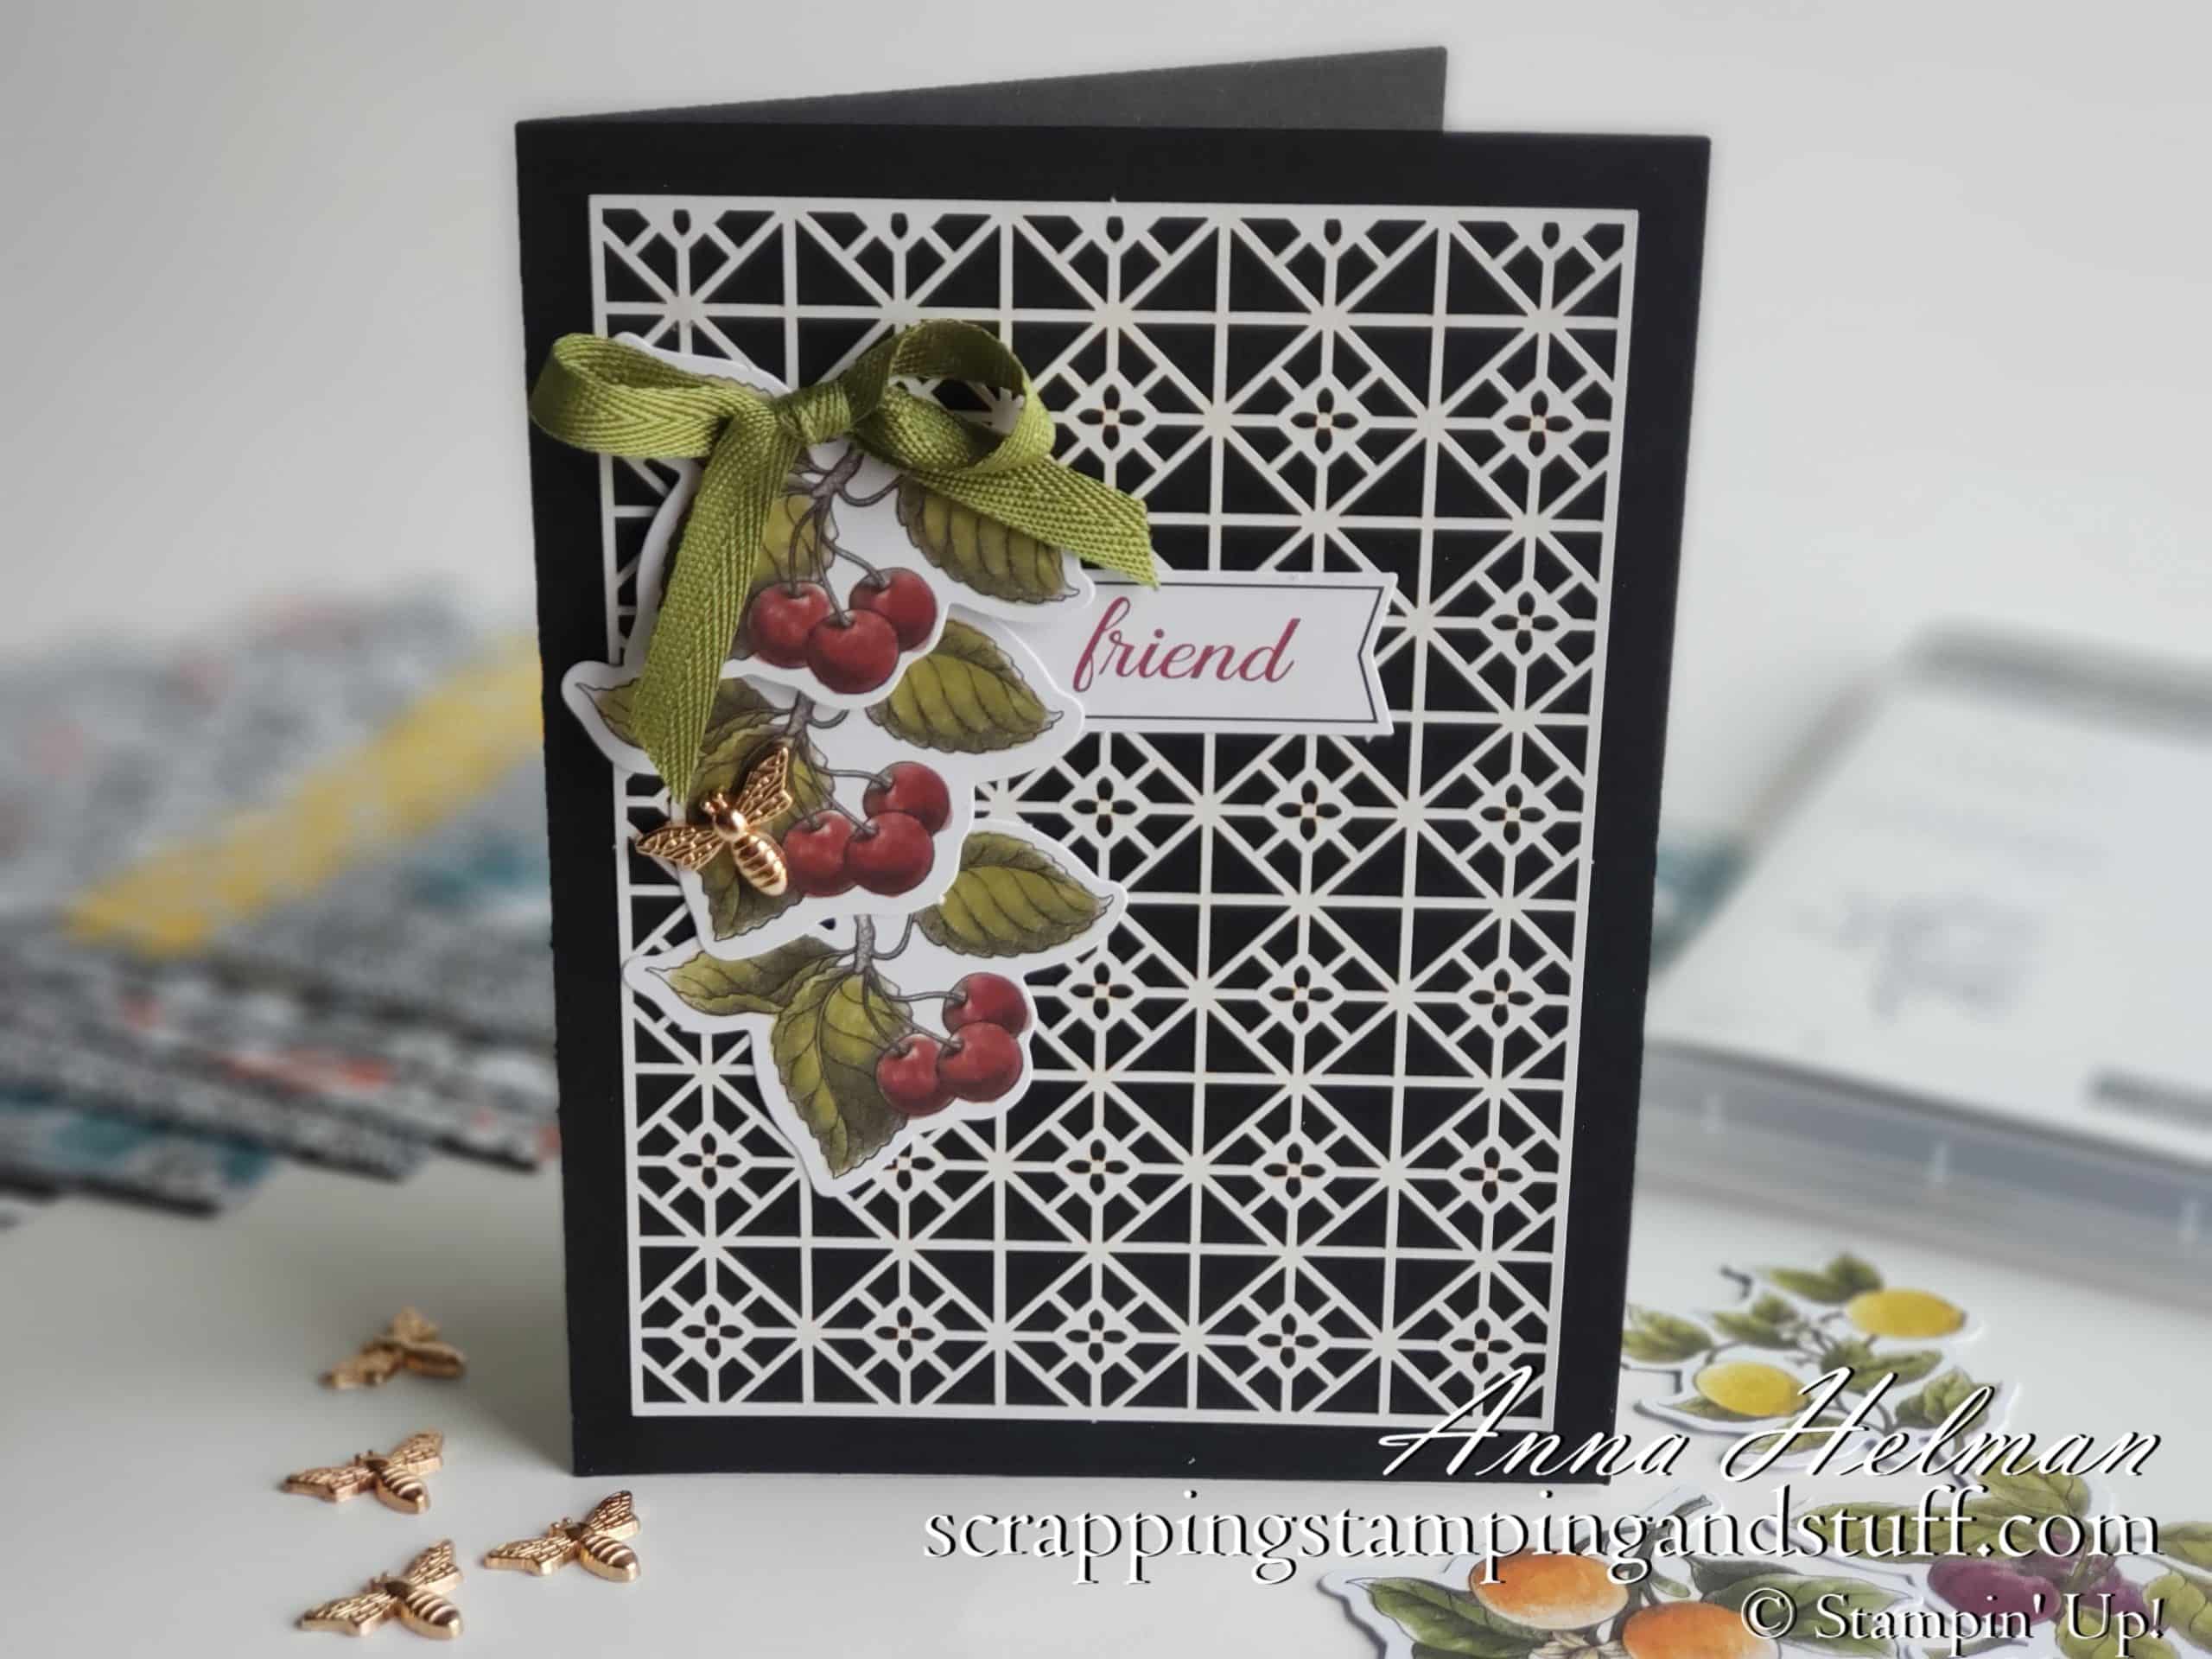 Such a pretty and simple card made with the Stampin Up Botanical Prints Product Medley. Cherry card idea with bee embellishments!